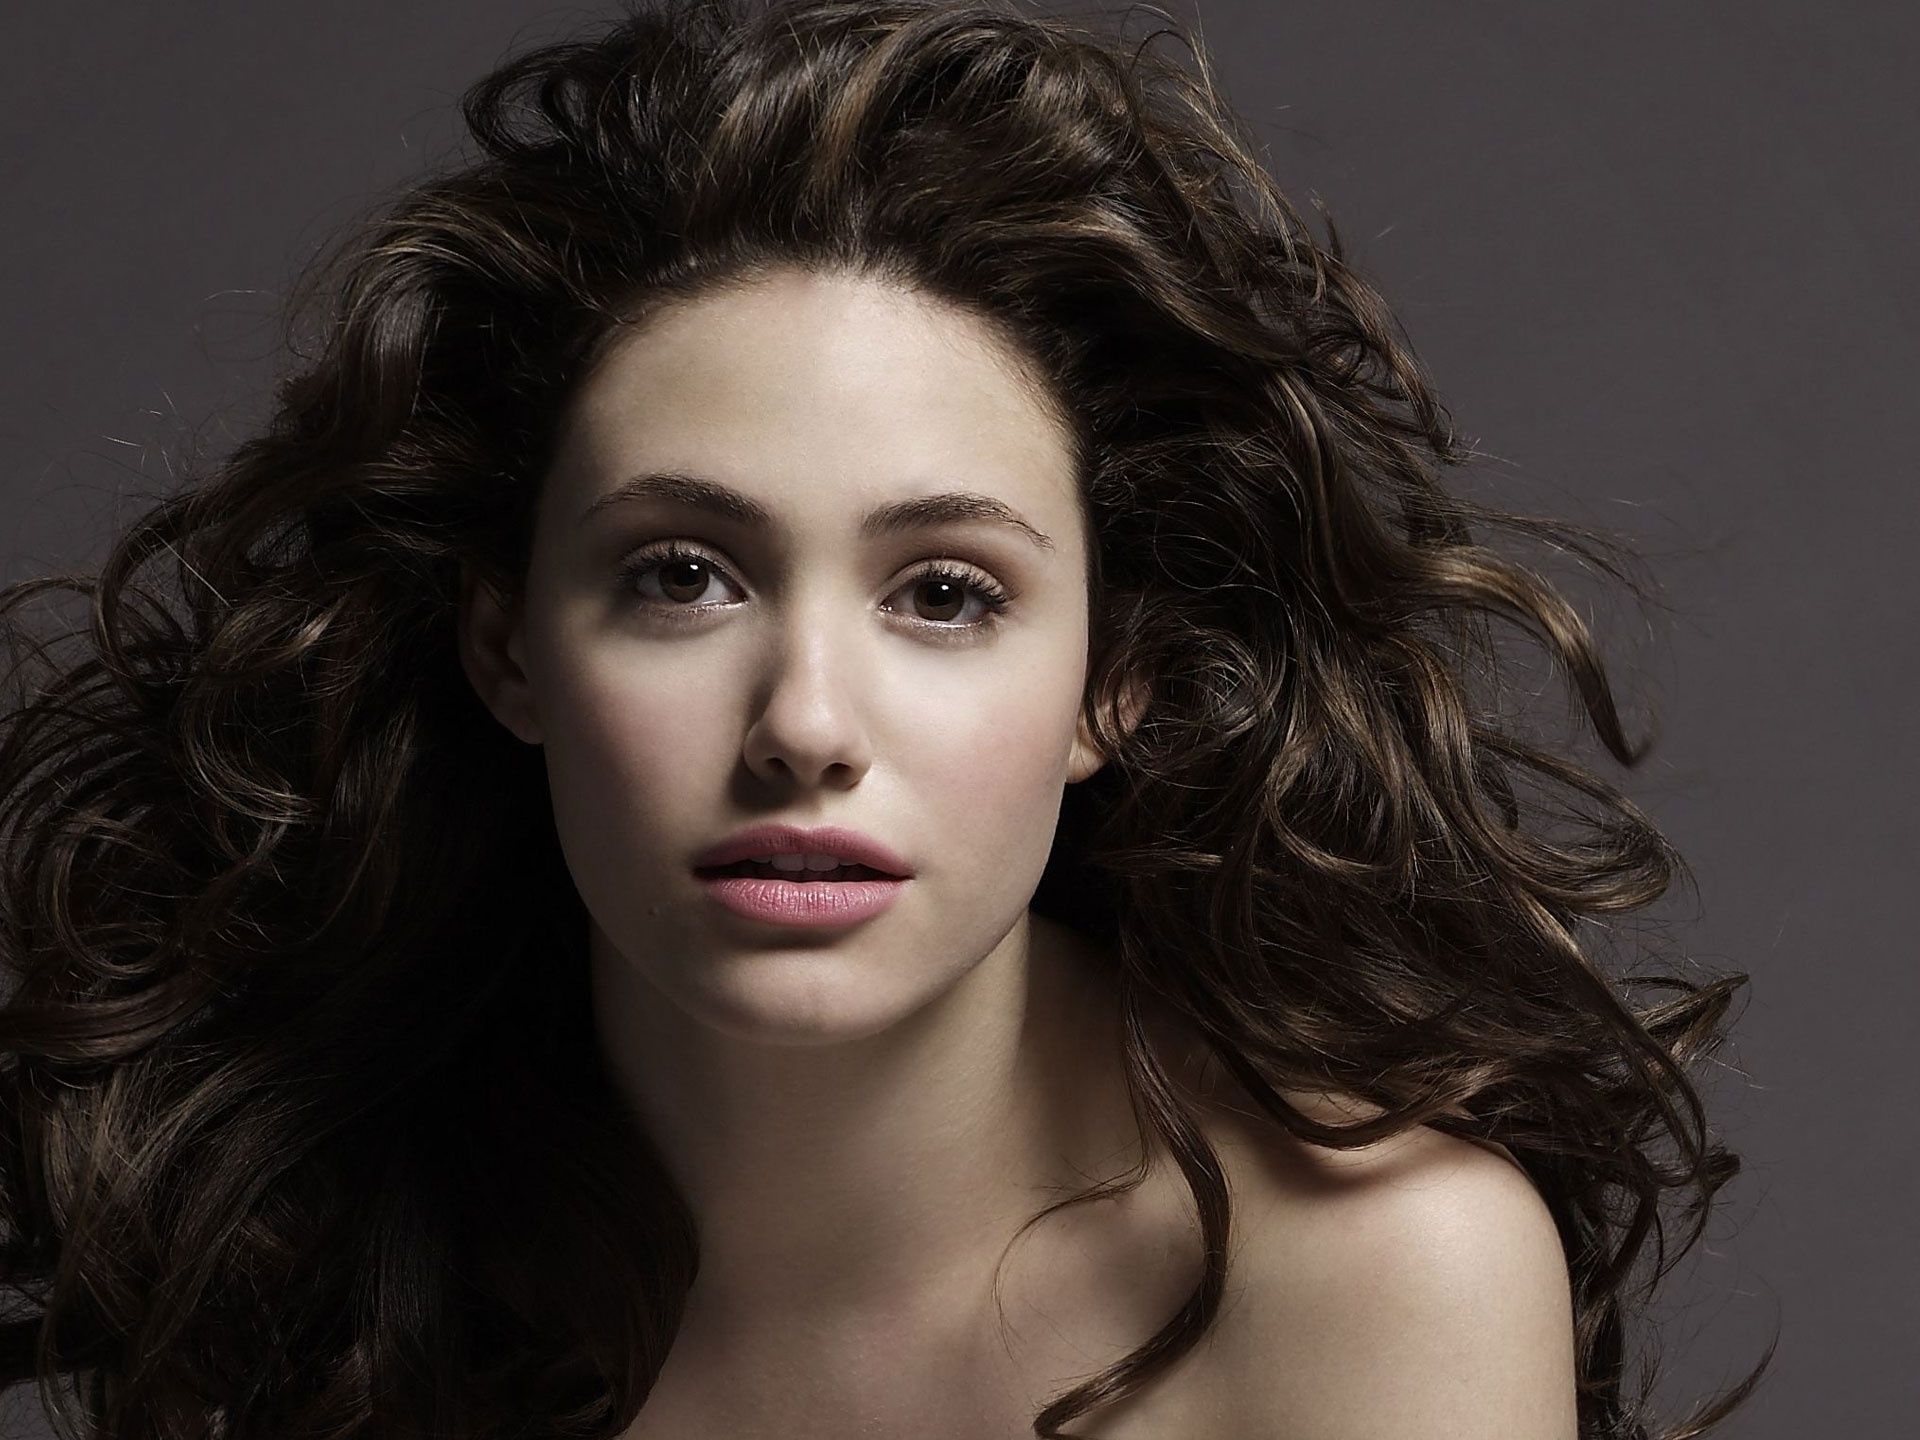 Emmy Rossum Wallpapers - Page 1 - HD Wallpapers